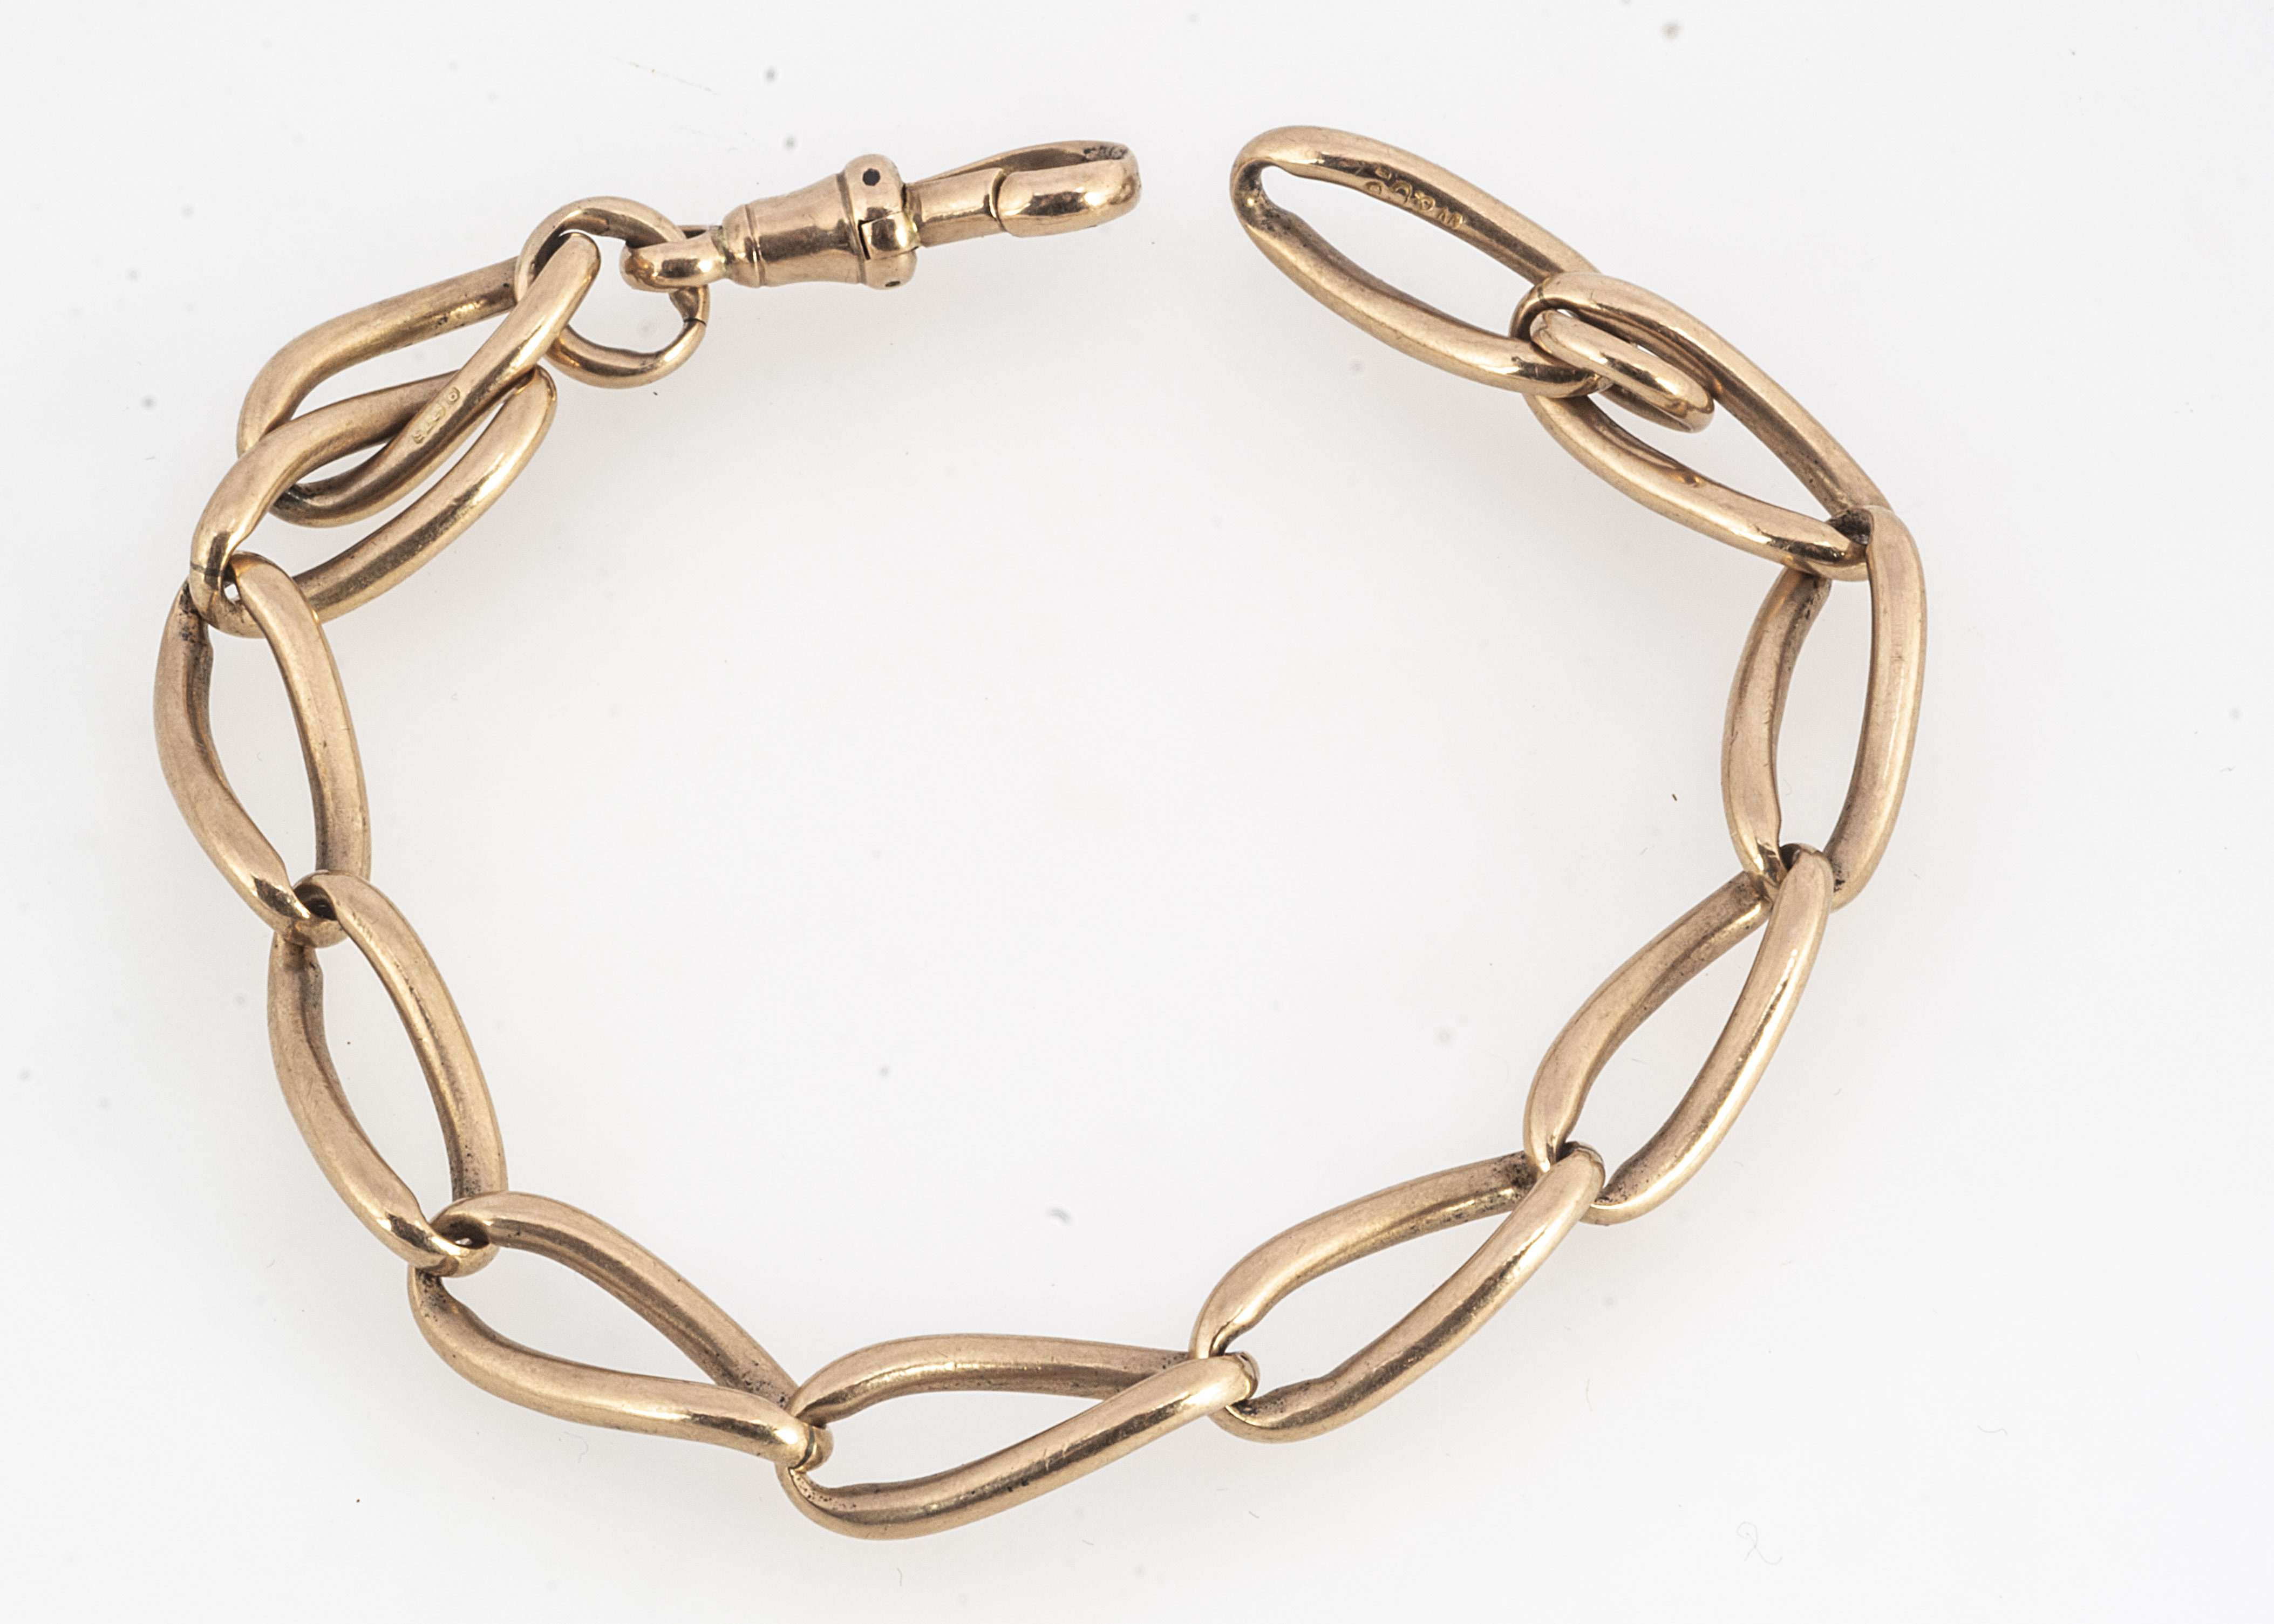 A 9ct gold curb linked bracelet, with snap clasp, 21.5 cm long 22.7g